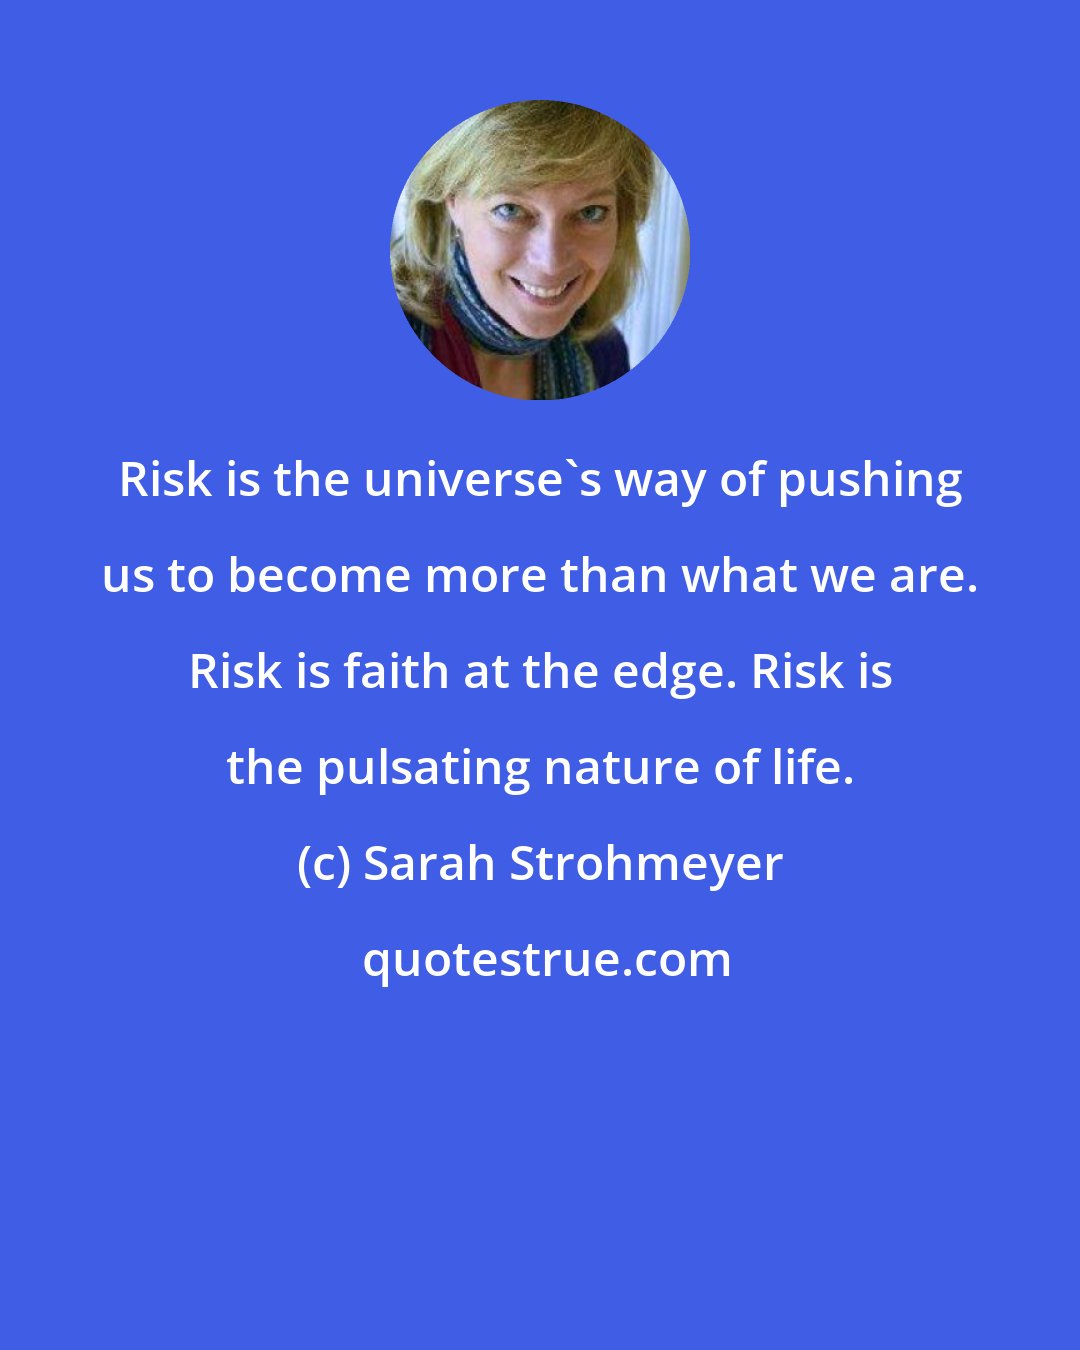 Sarah Strohmeyer: Risk is the universe's way of pushing us to become more than what we are. Risk is faith at the edge. Risk is the pulsating nature of life.